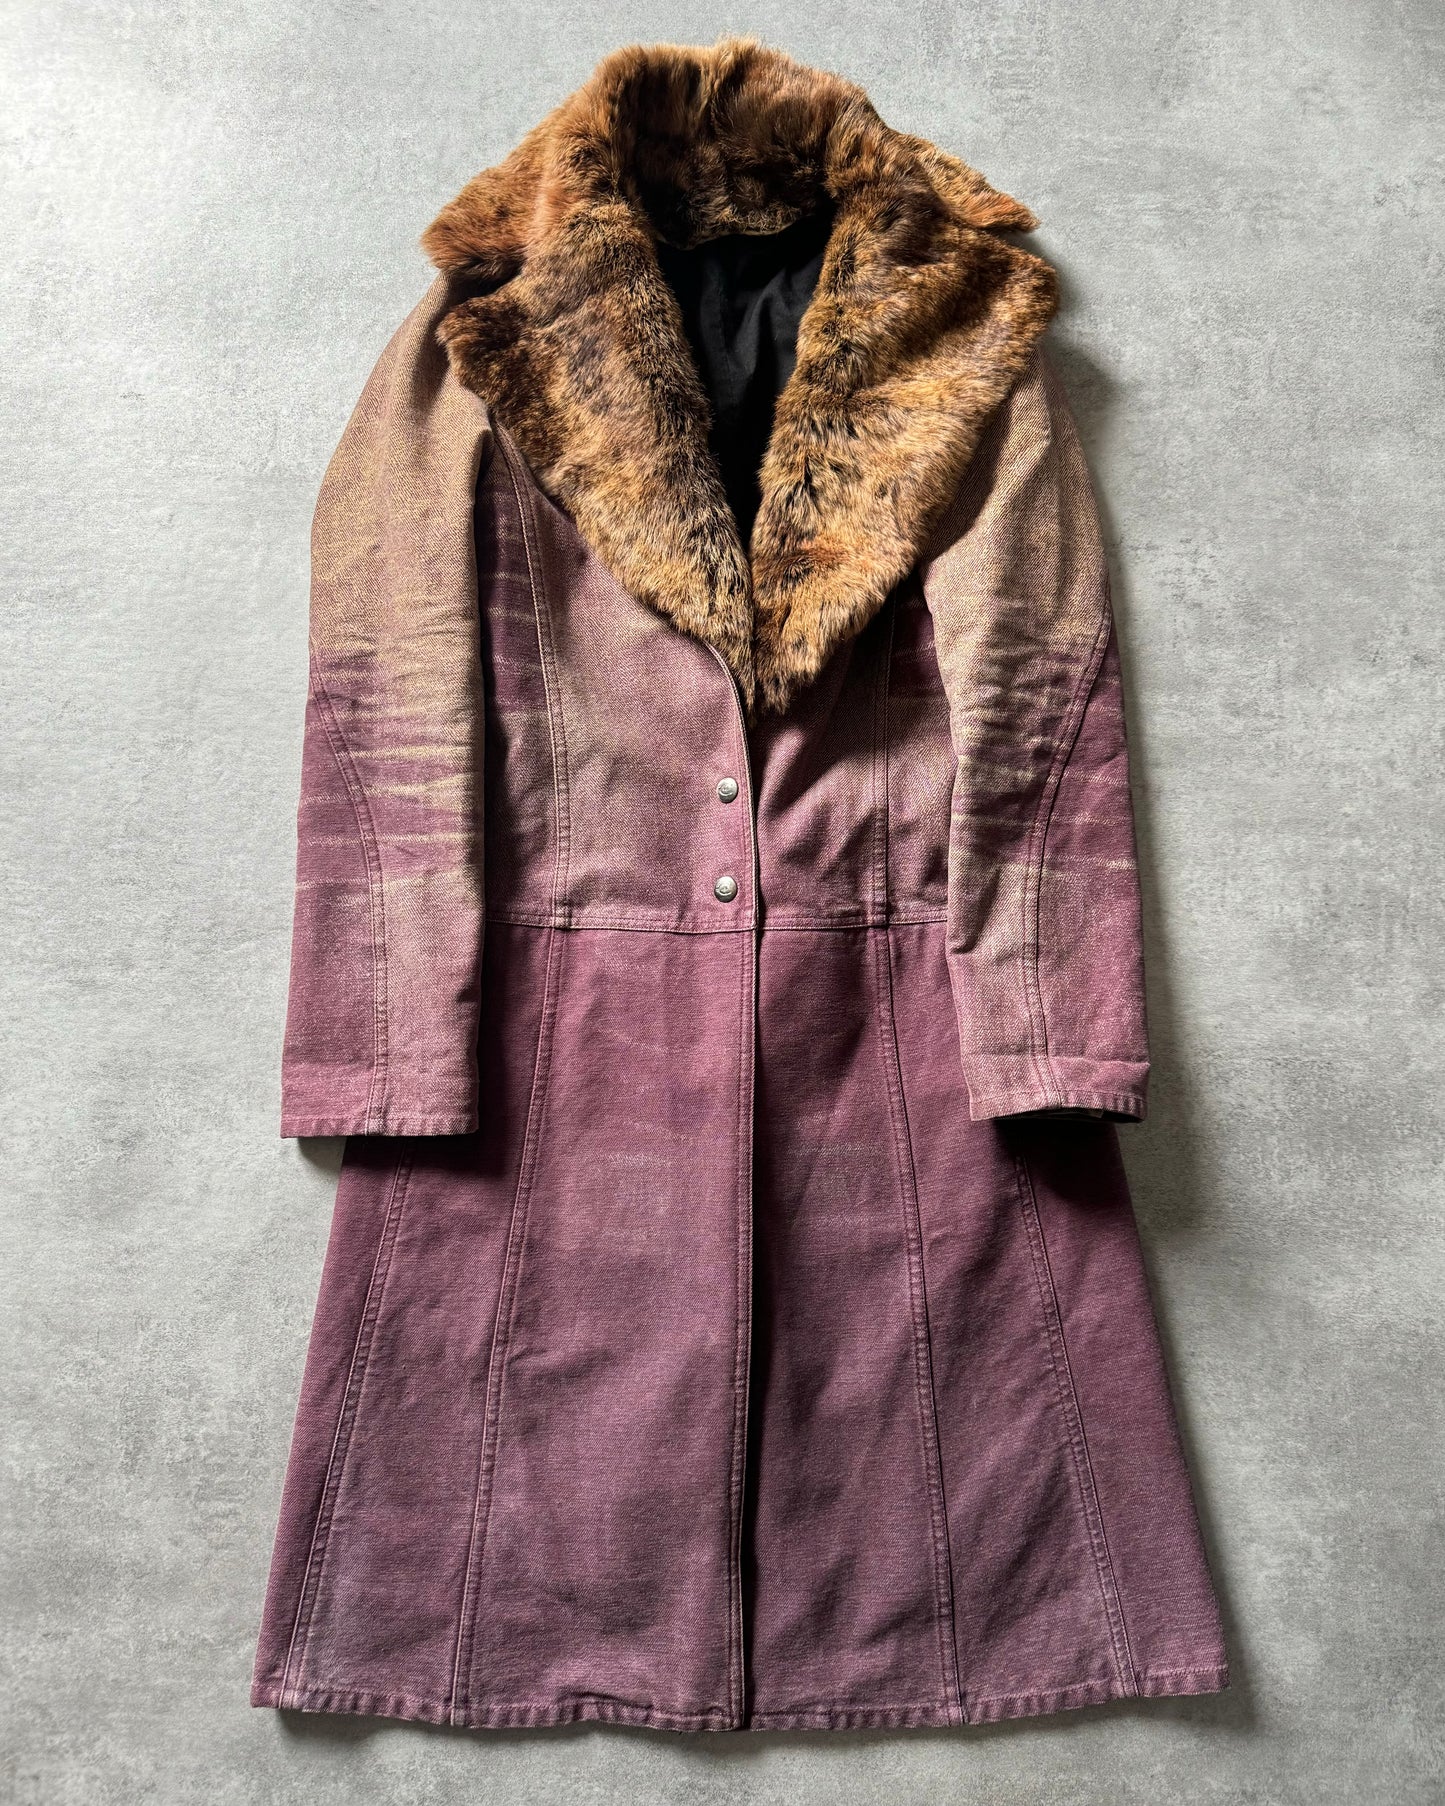 SS2004 Cavalli Sunset Faded Purple Trench Coat (S) - 1